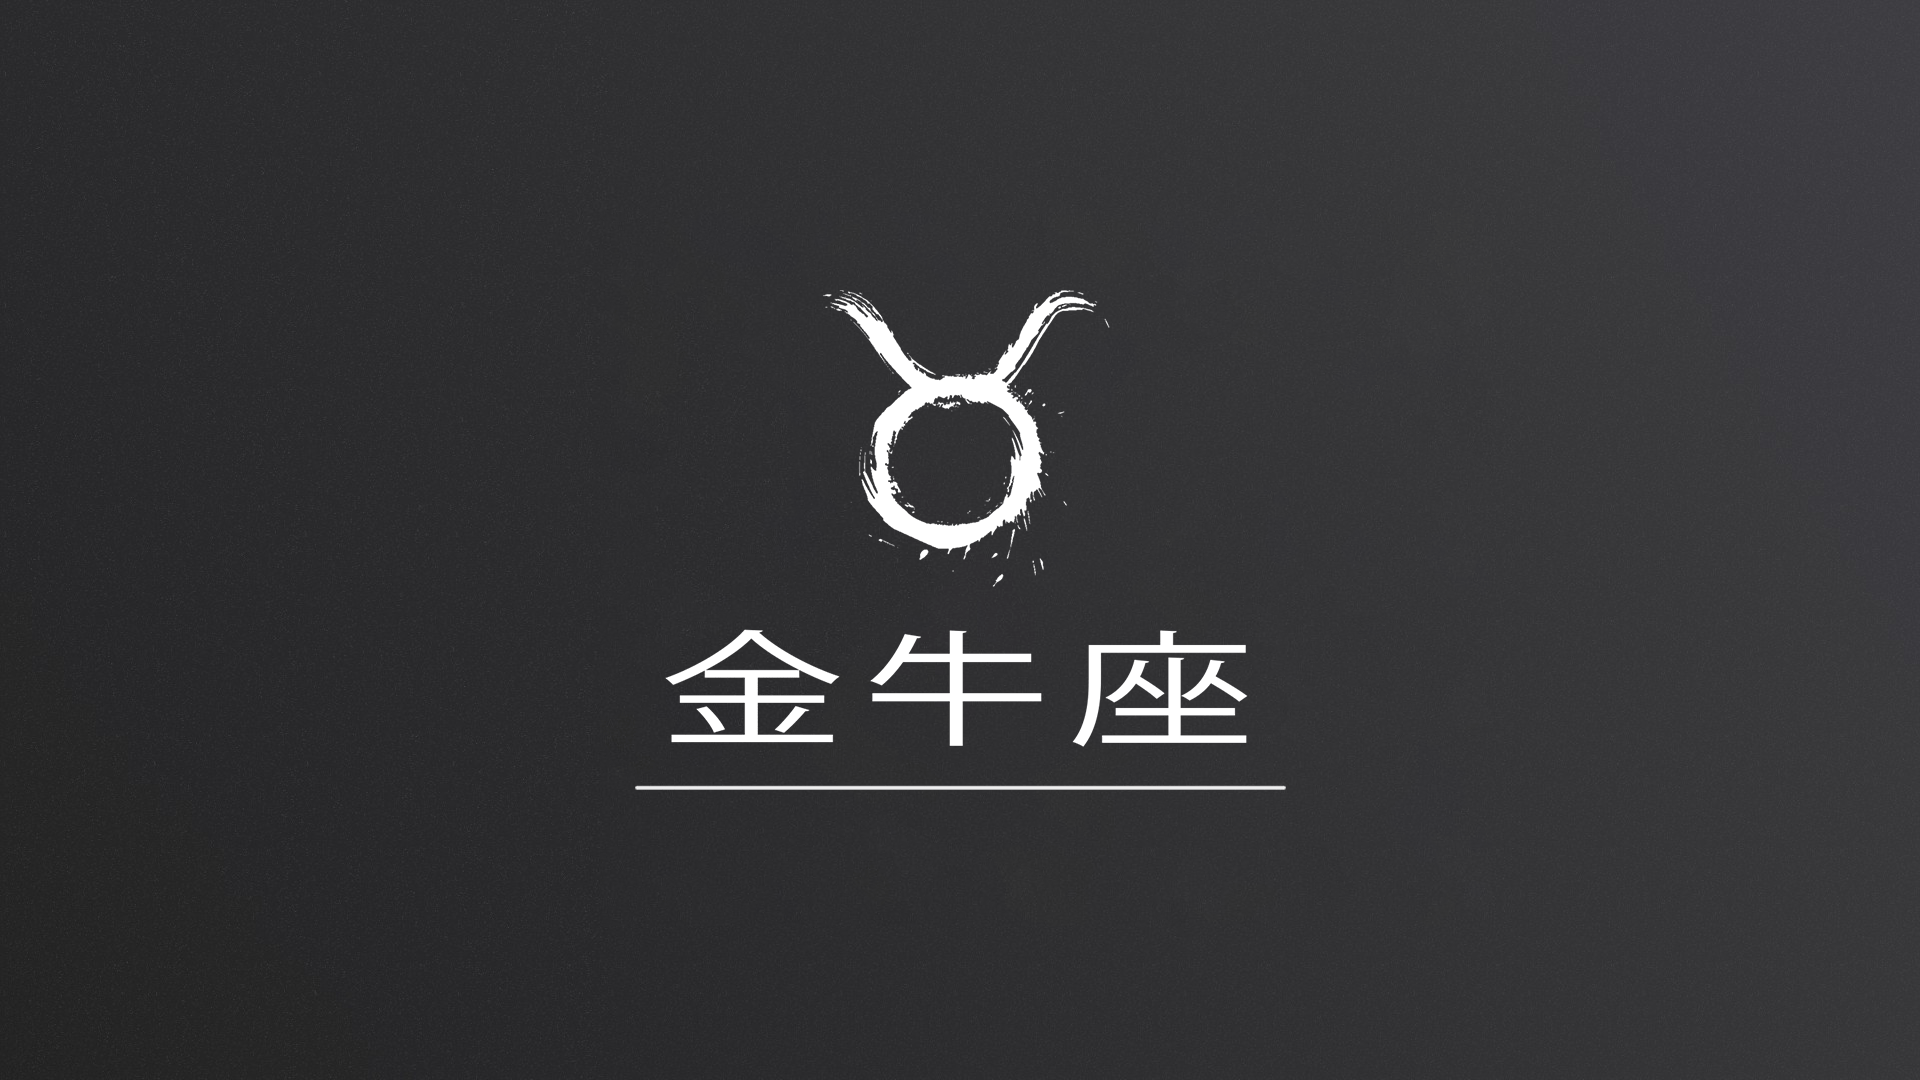 Chinese fonts logo design, with the concept of 